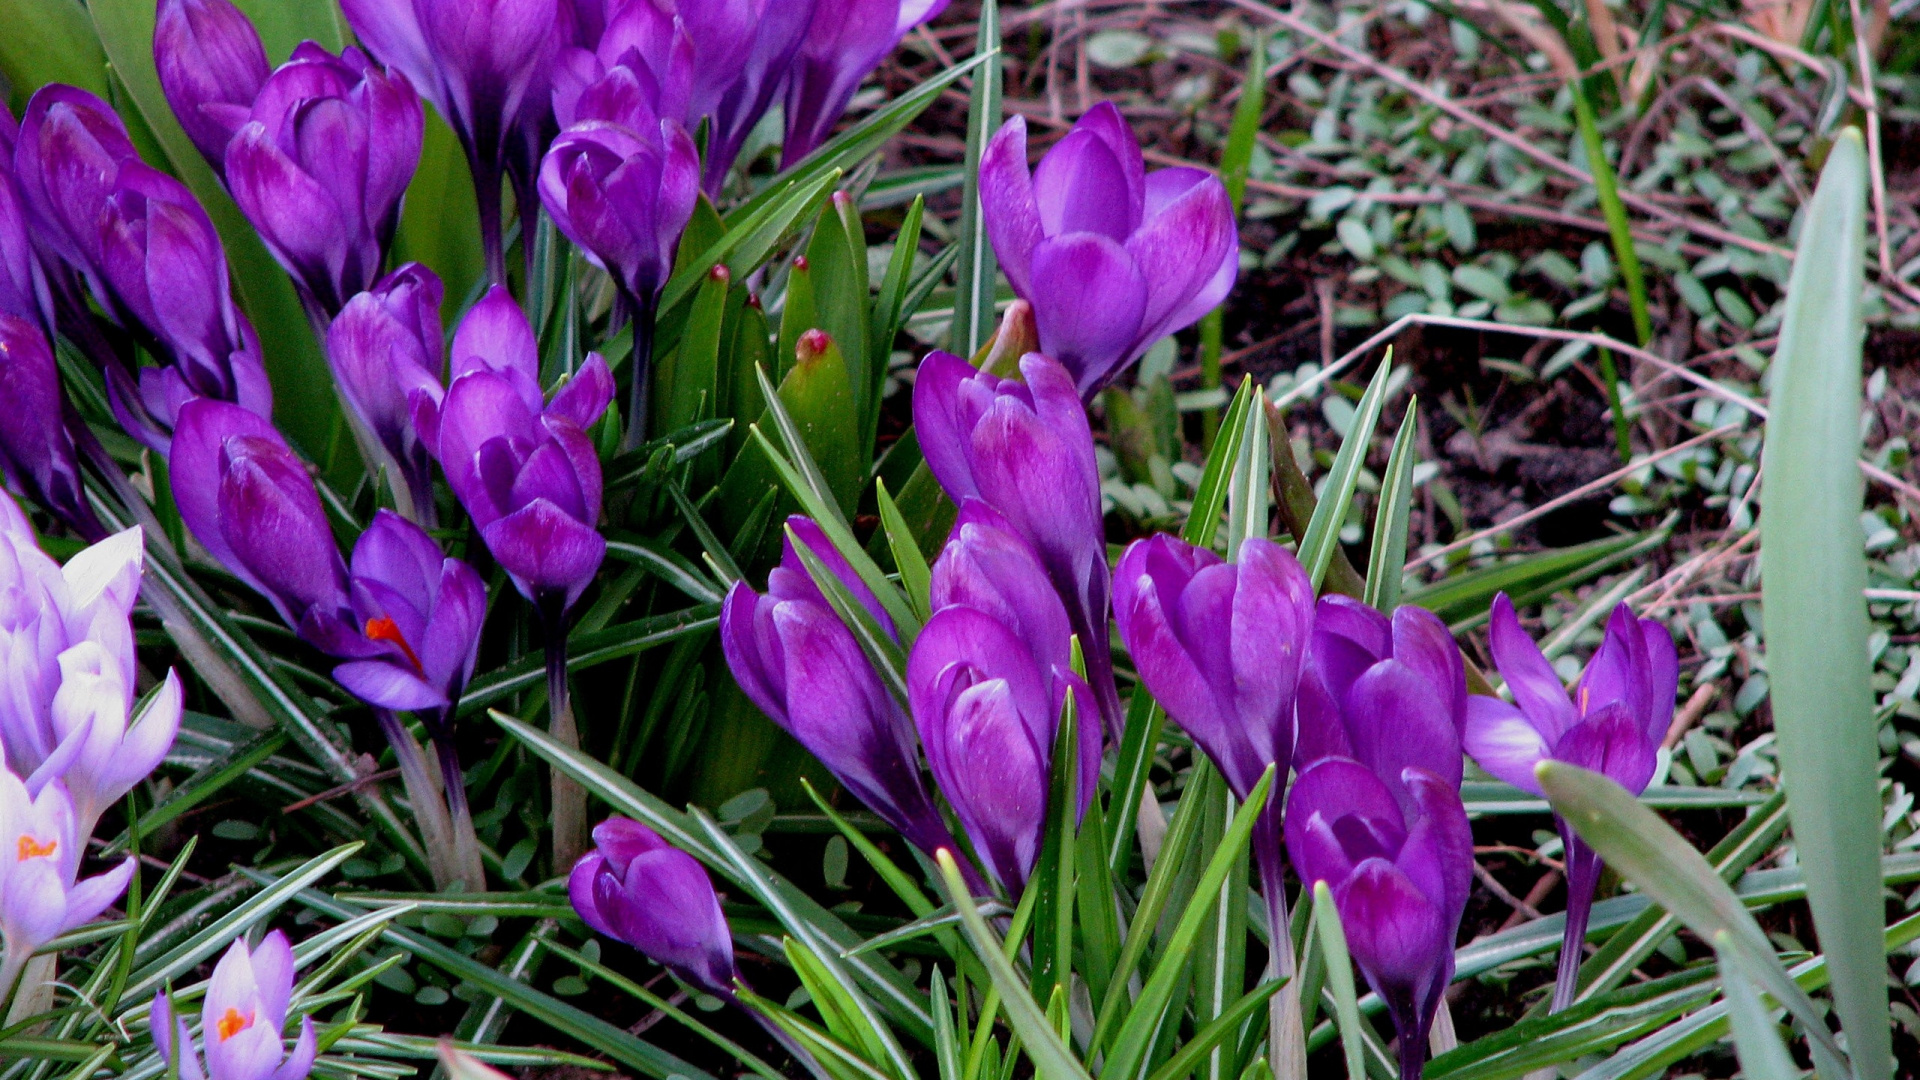 Purple Flowers on Green Grass During Daytime. Wallpaper in 1920x1080 Resolution